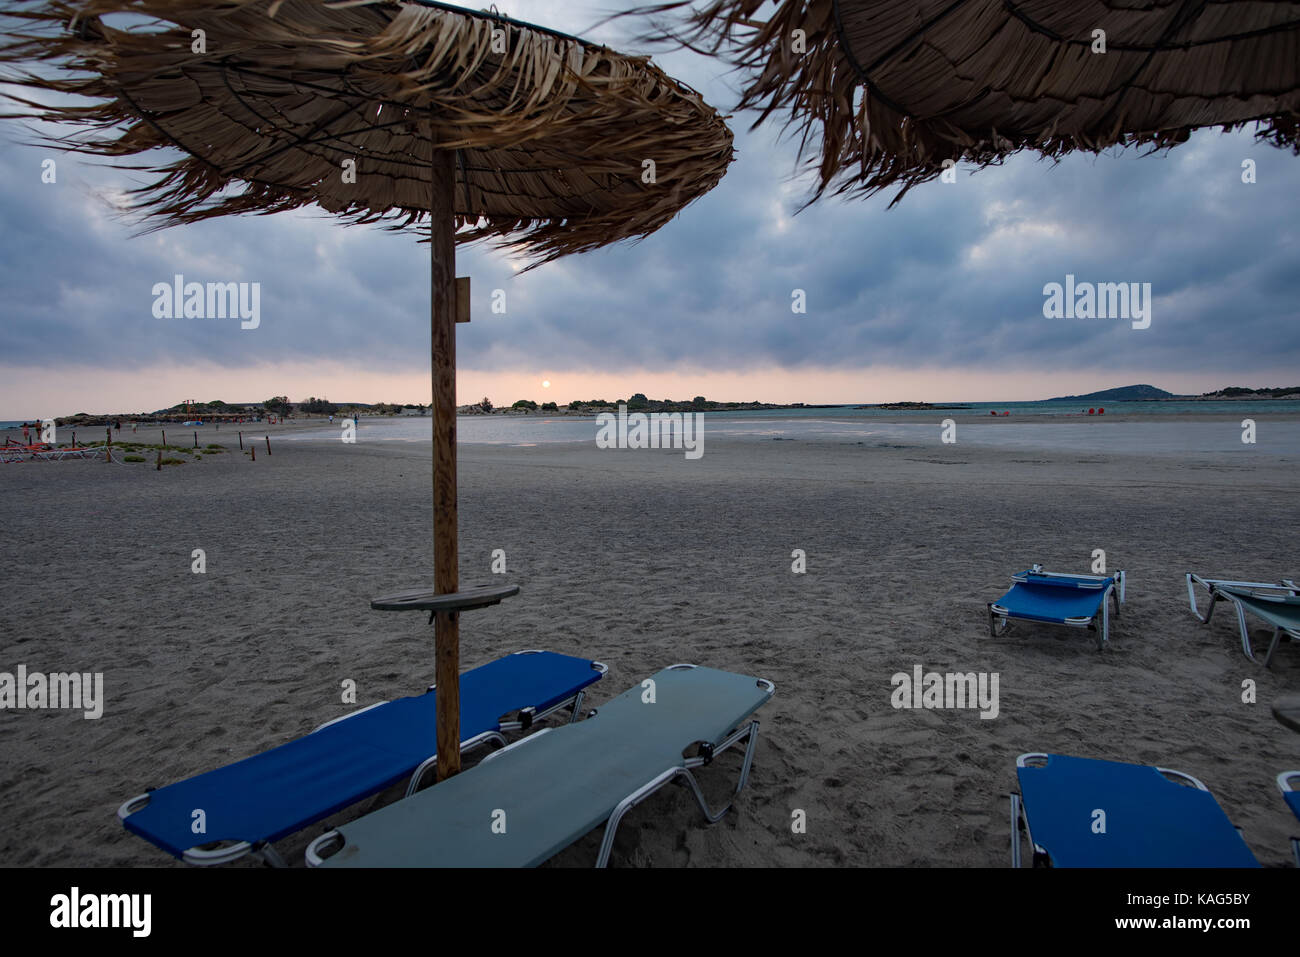 Elafonisi beach with palm ubmrellas in bad weather conditions Stock Photo